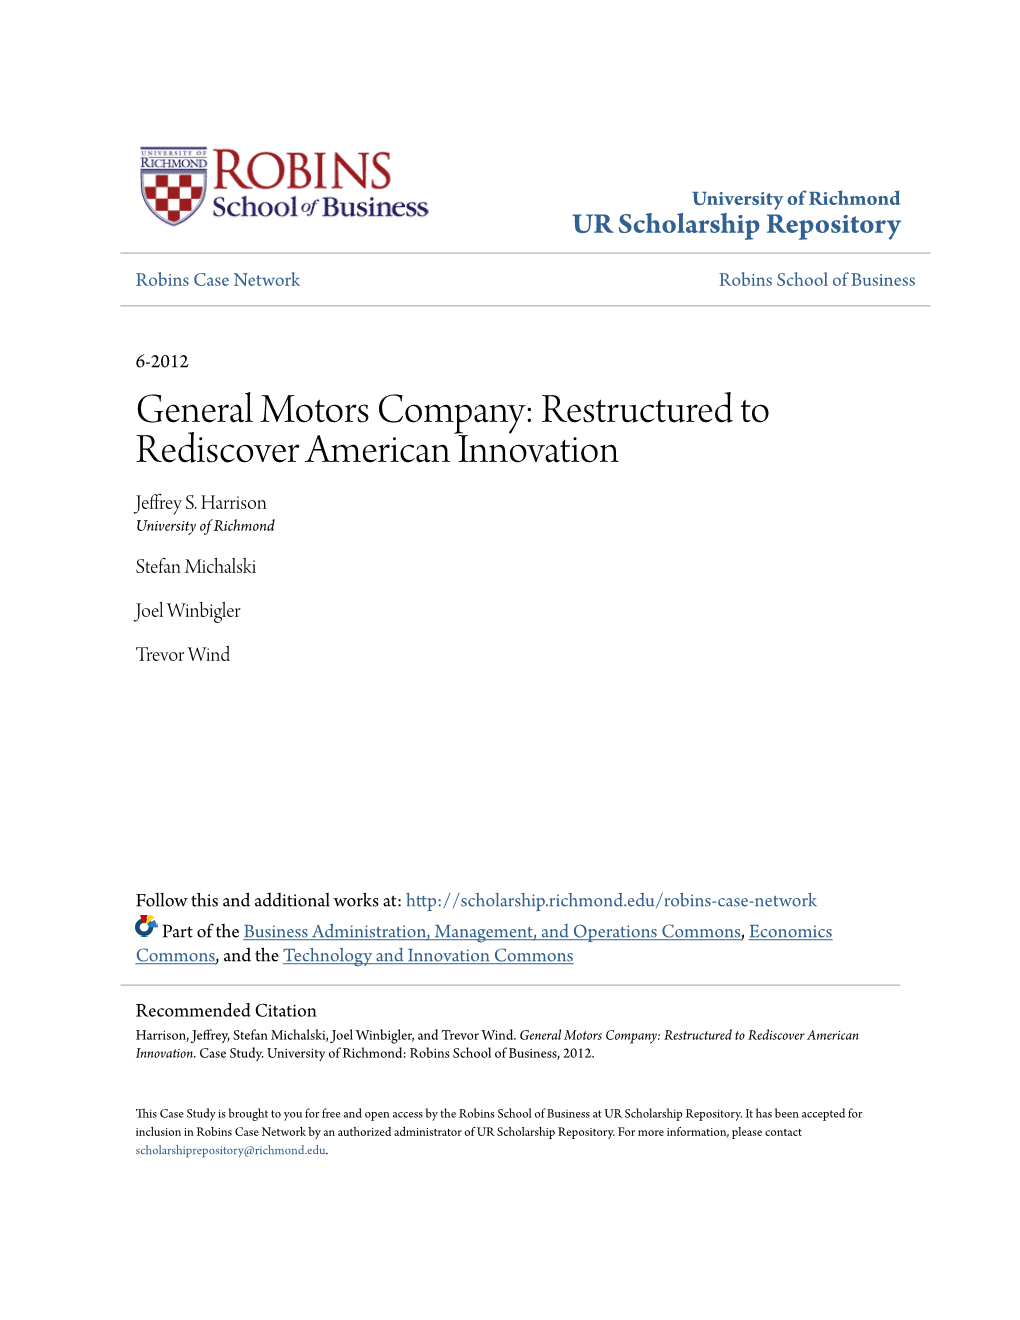 General Motors Company: Restructured to Rediscover American Innovation Jeffrey S